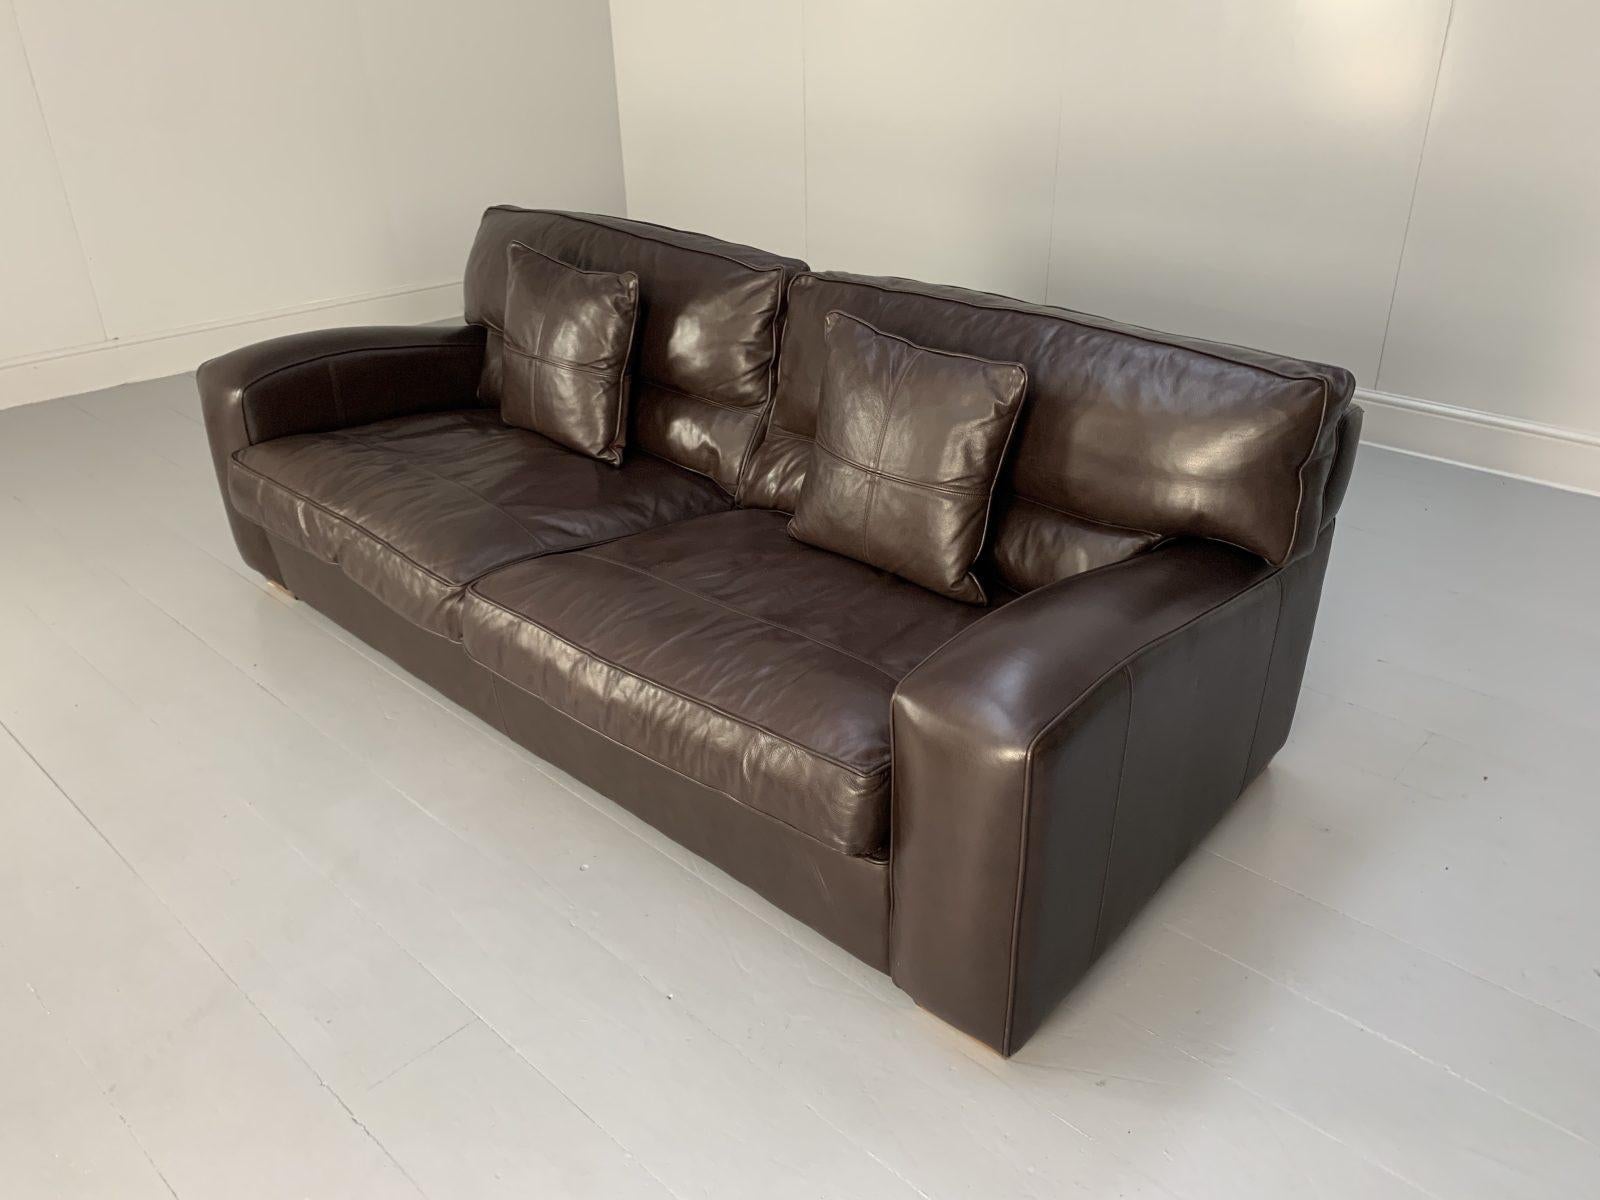 Duresta “Panther” Grand 3-Seat Sofa, in Dark Brown Leather For Sale 3